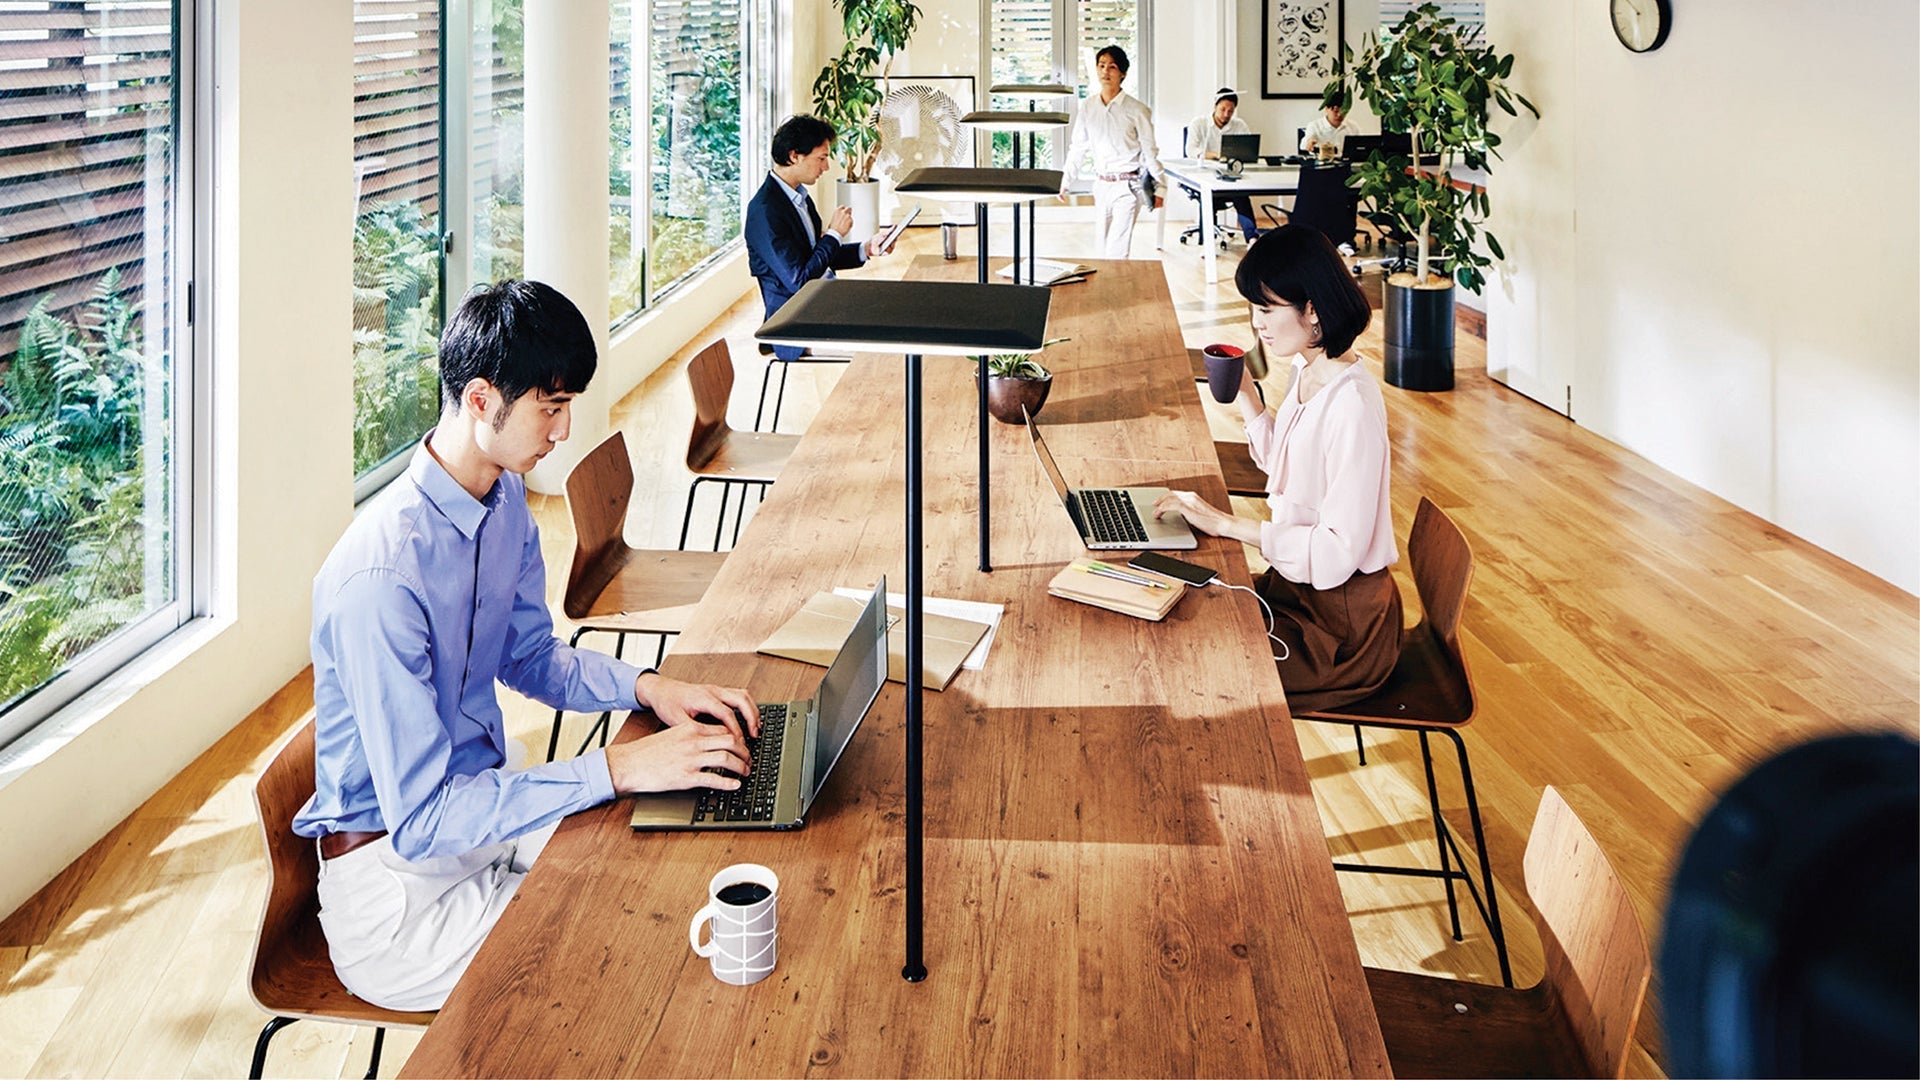 Emerging Trends in Workspaces Catering to Employee Needs